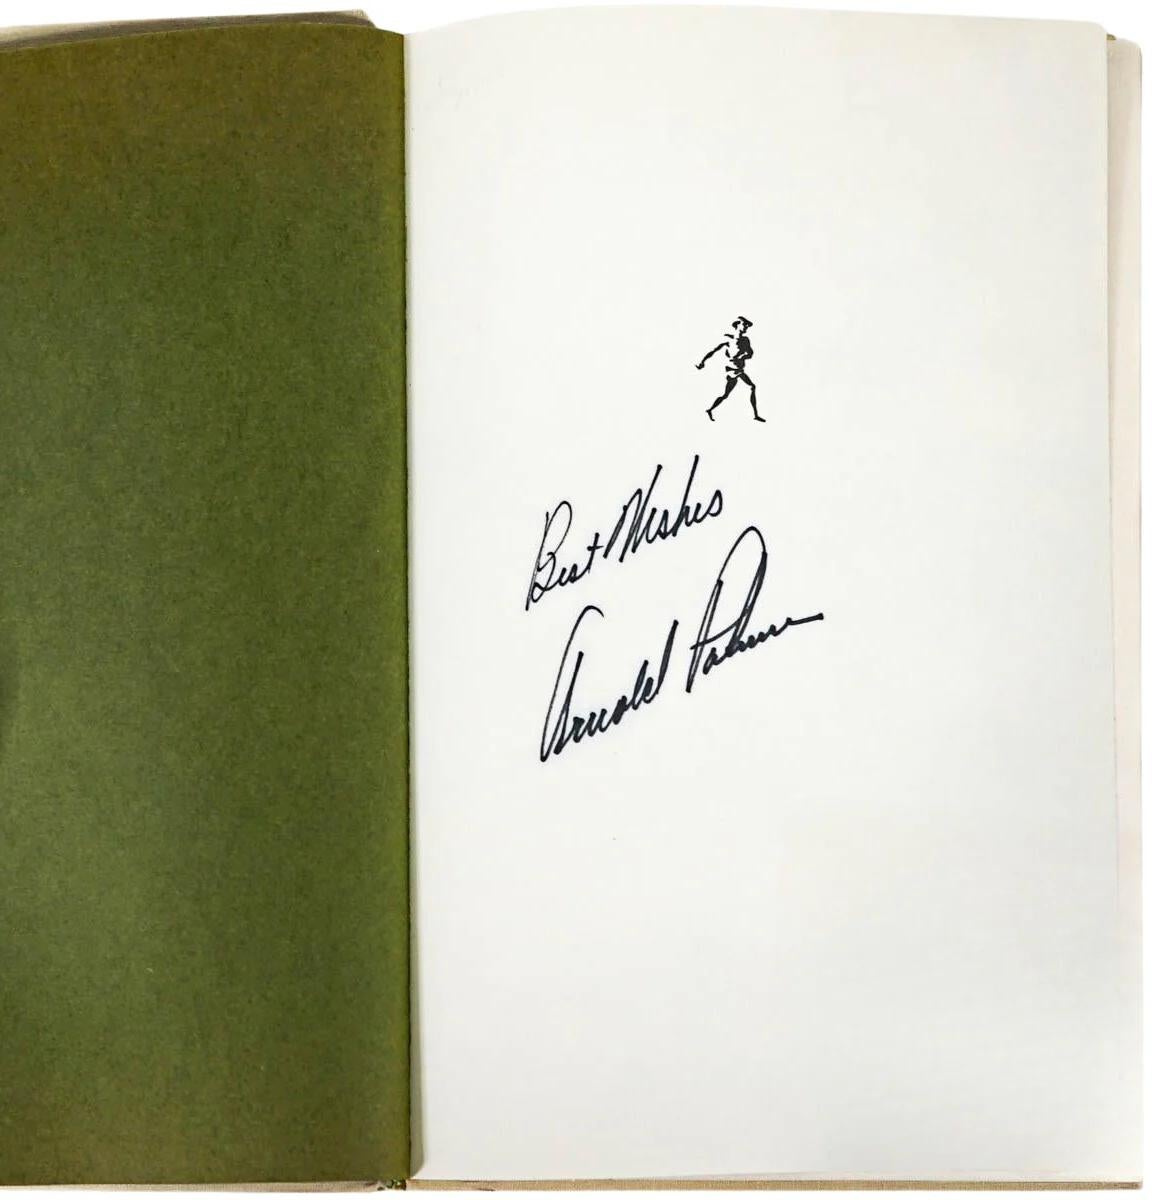 Palmer, Arnold, with Furlong, William Barry. Go For Broke! My Philosophy on Winning Golf. New York: Simon and Schuster, 1973. Signed by Arnold Palmer on the colophon page. First edition, first issue. In publisher's original cream cloth hardcover